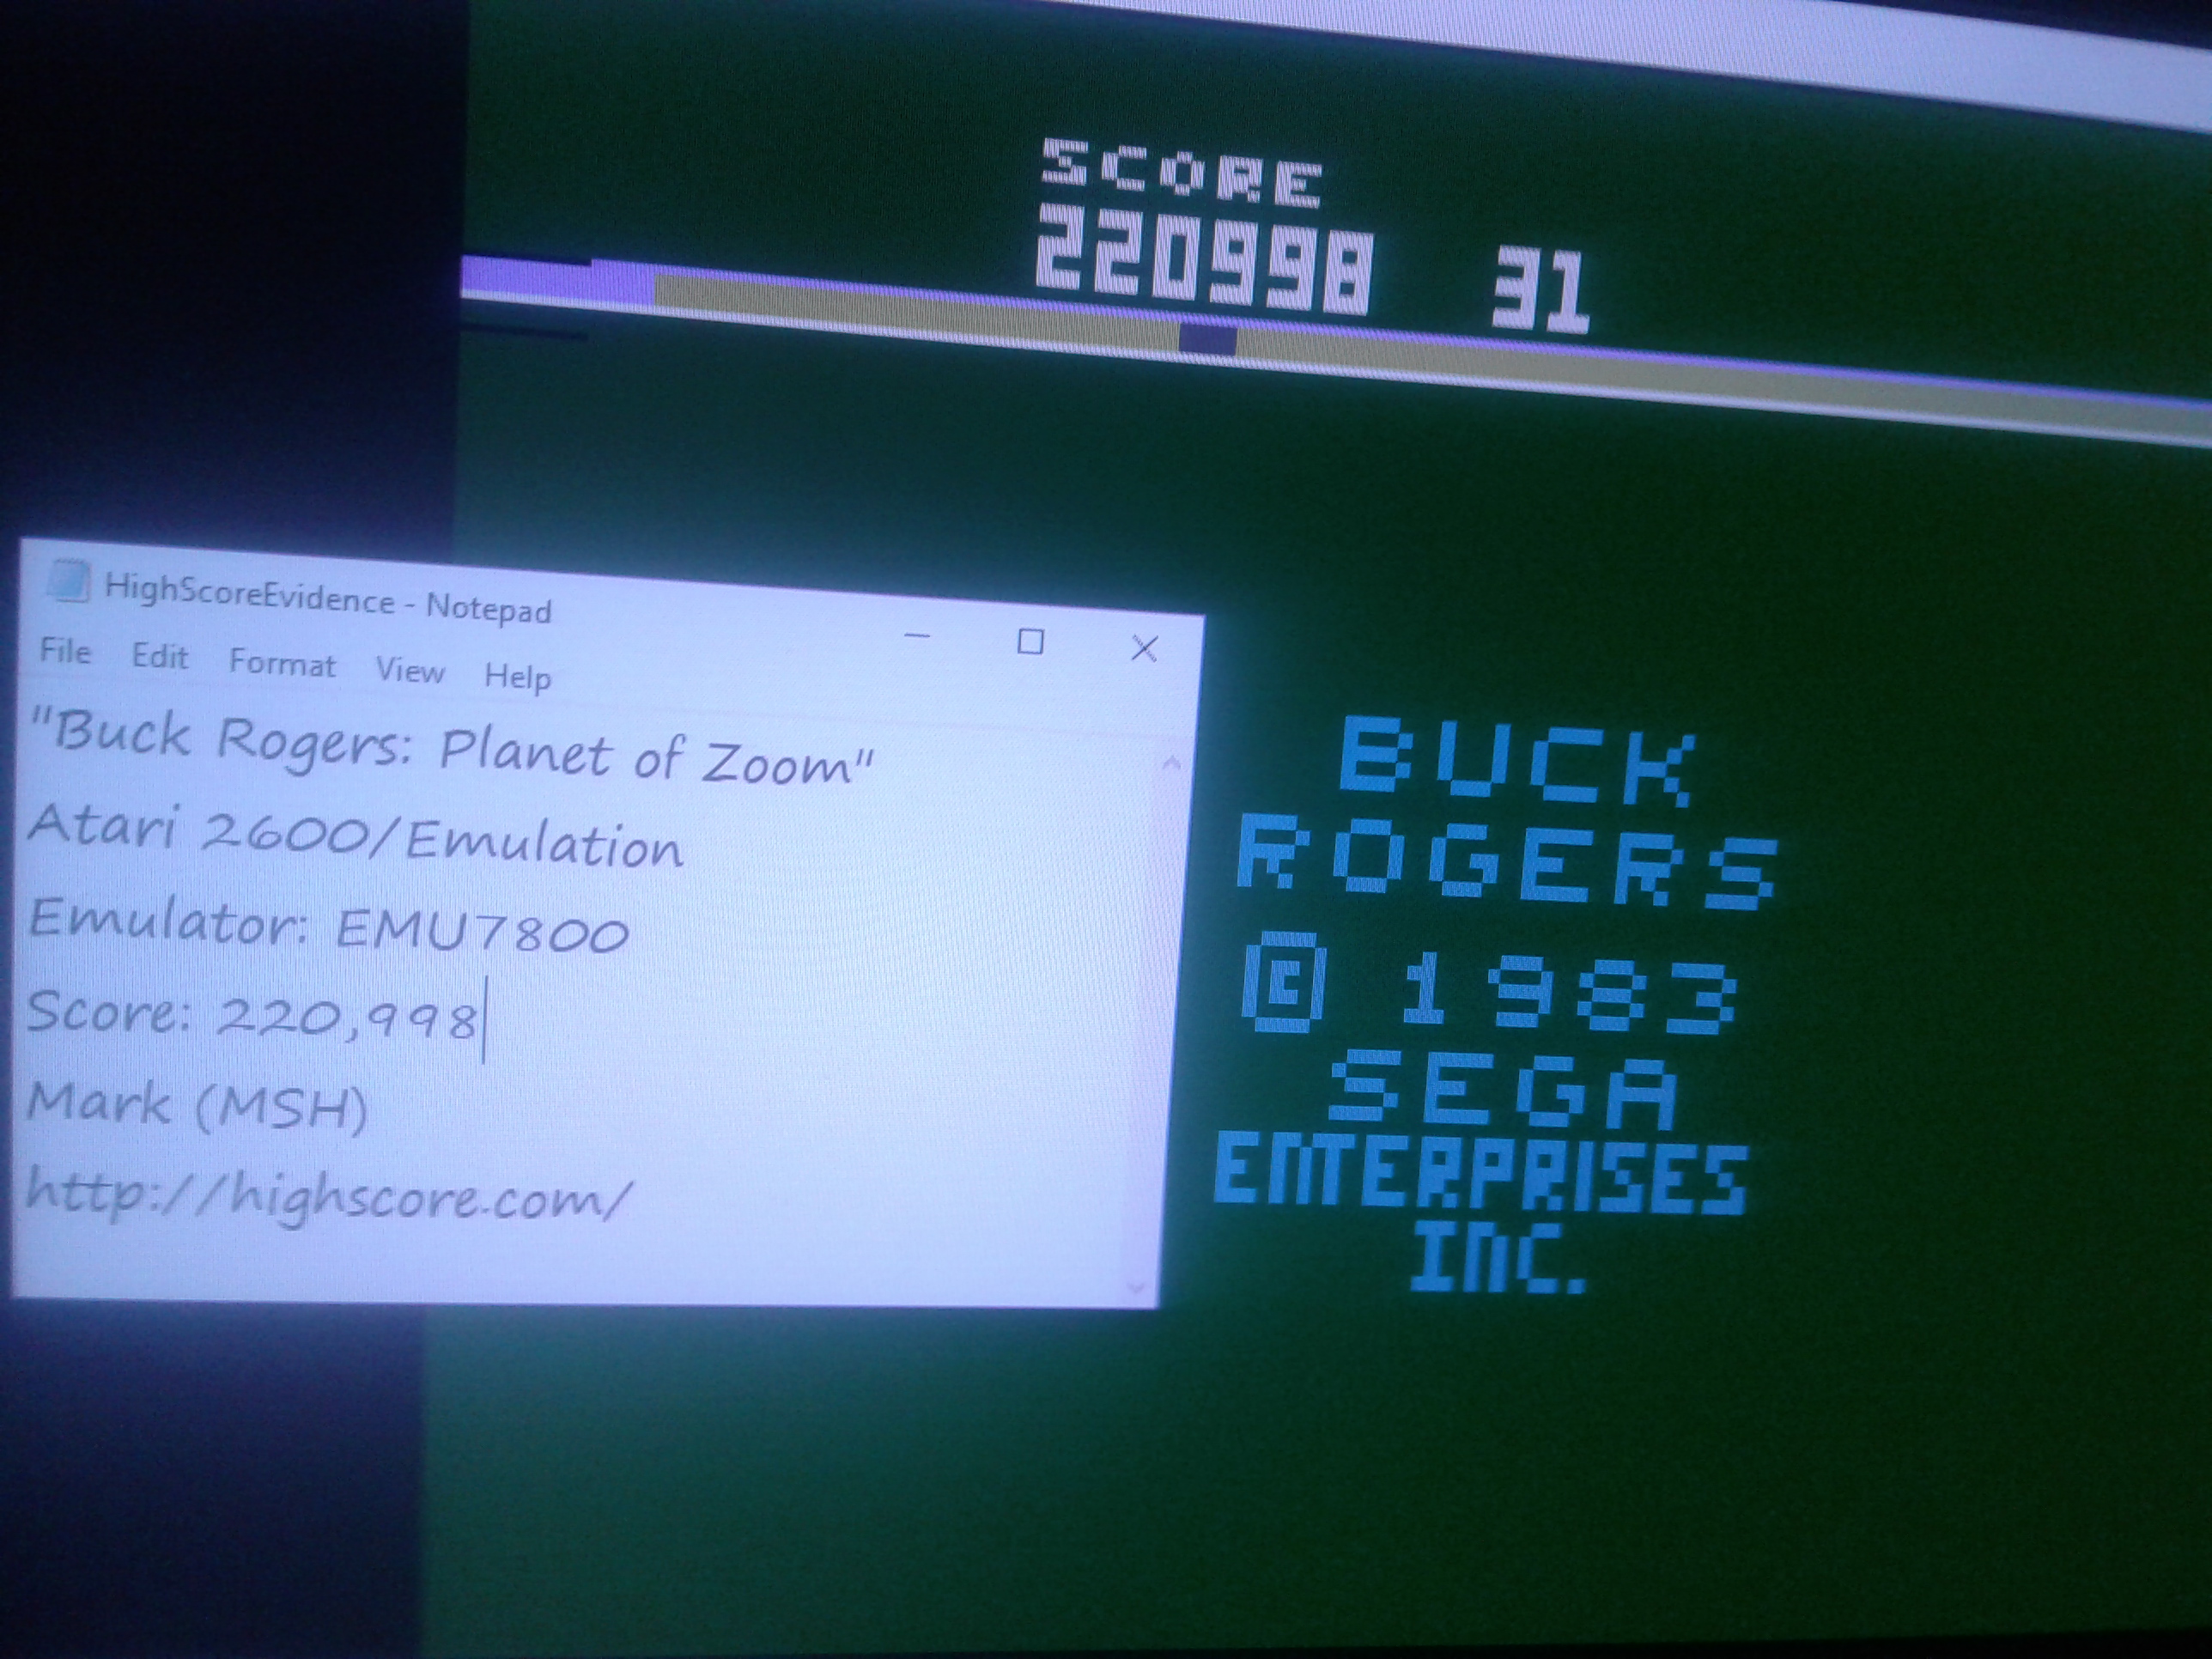 Mark: Buck Rogers: Planet of Zoom (Atari 2600 Emulated Novice/B Mode) 220,998 points on 2019-01-15 00:20:02